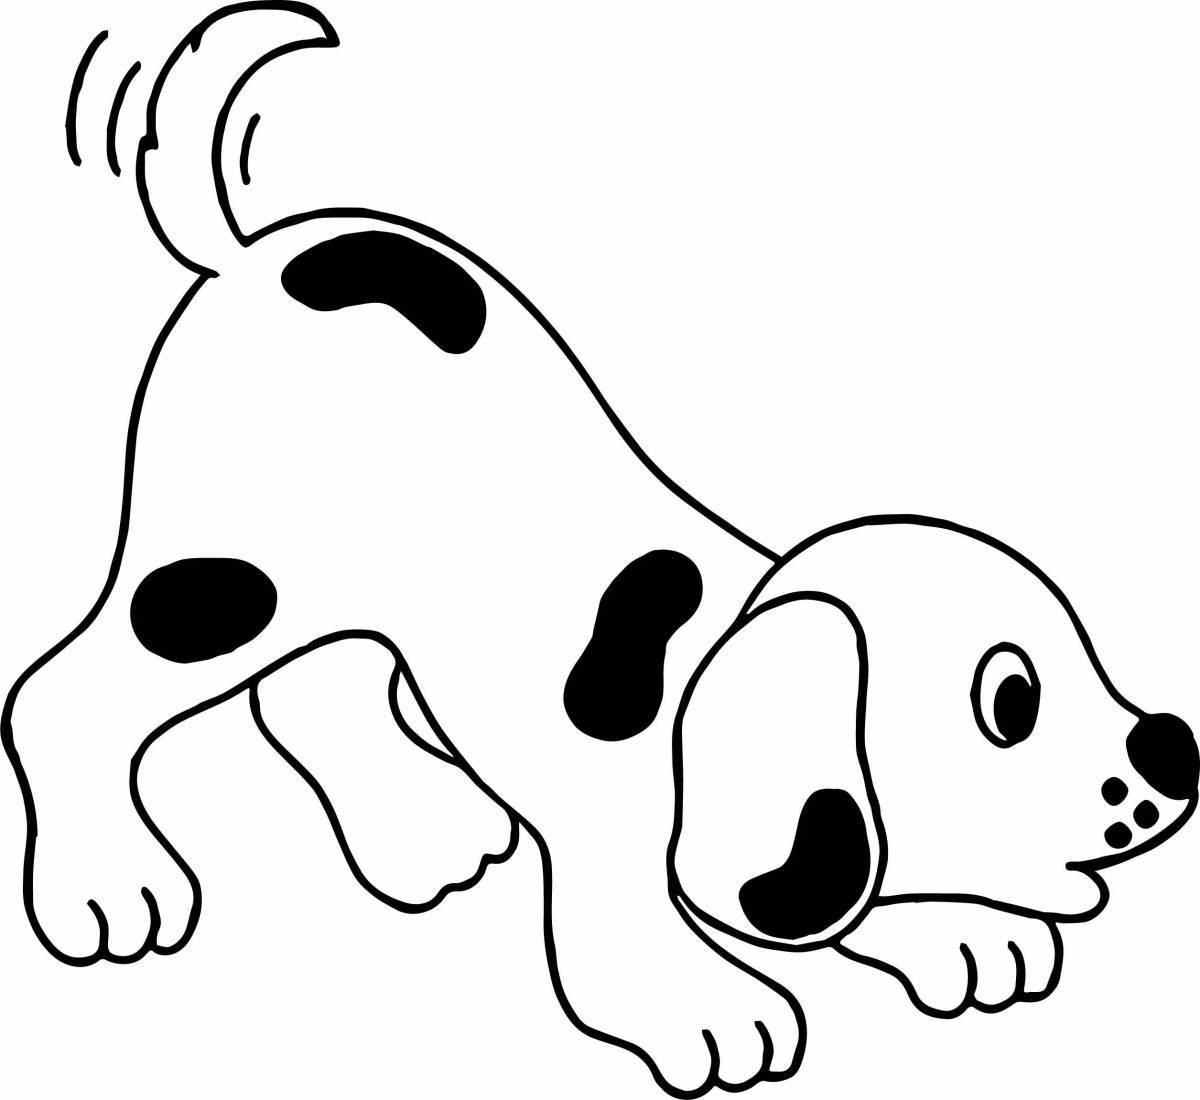 Black and white dogs #11